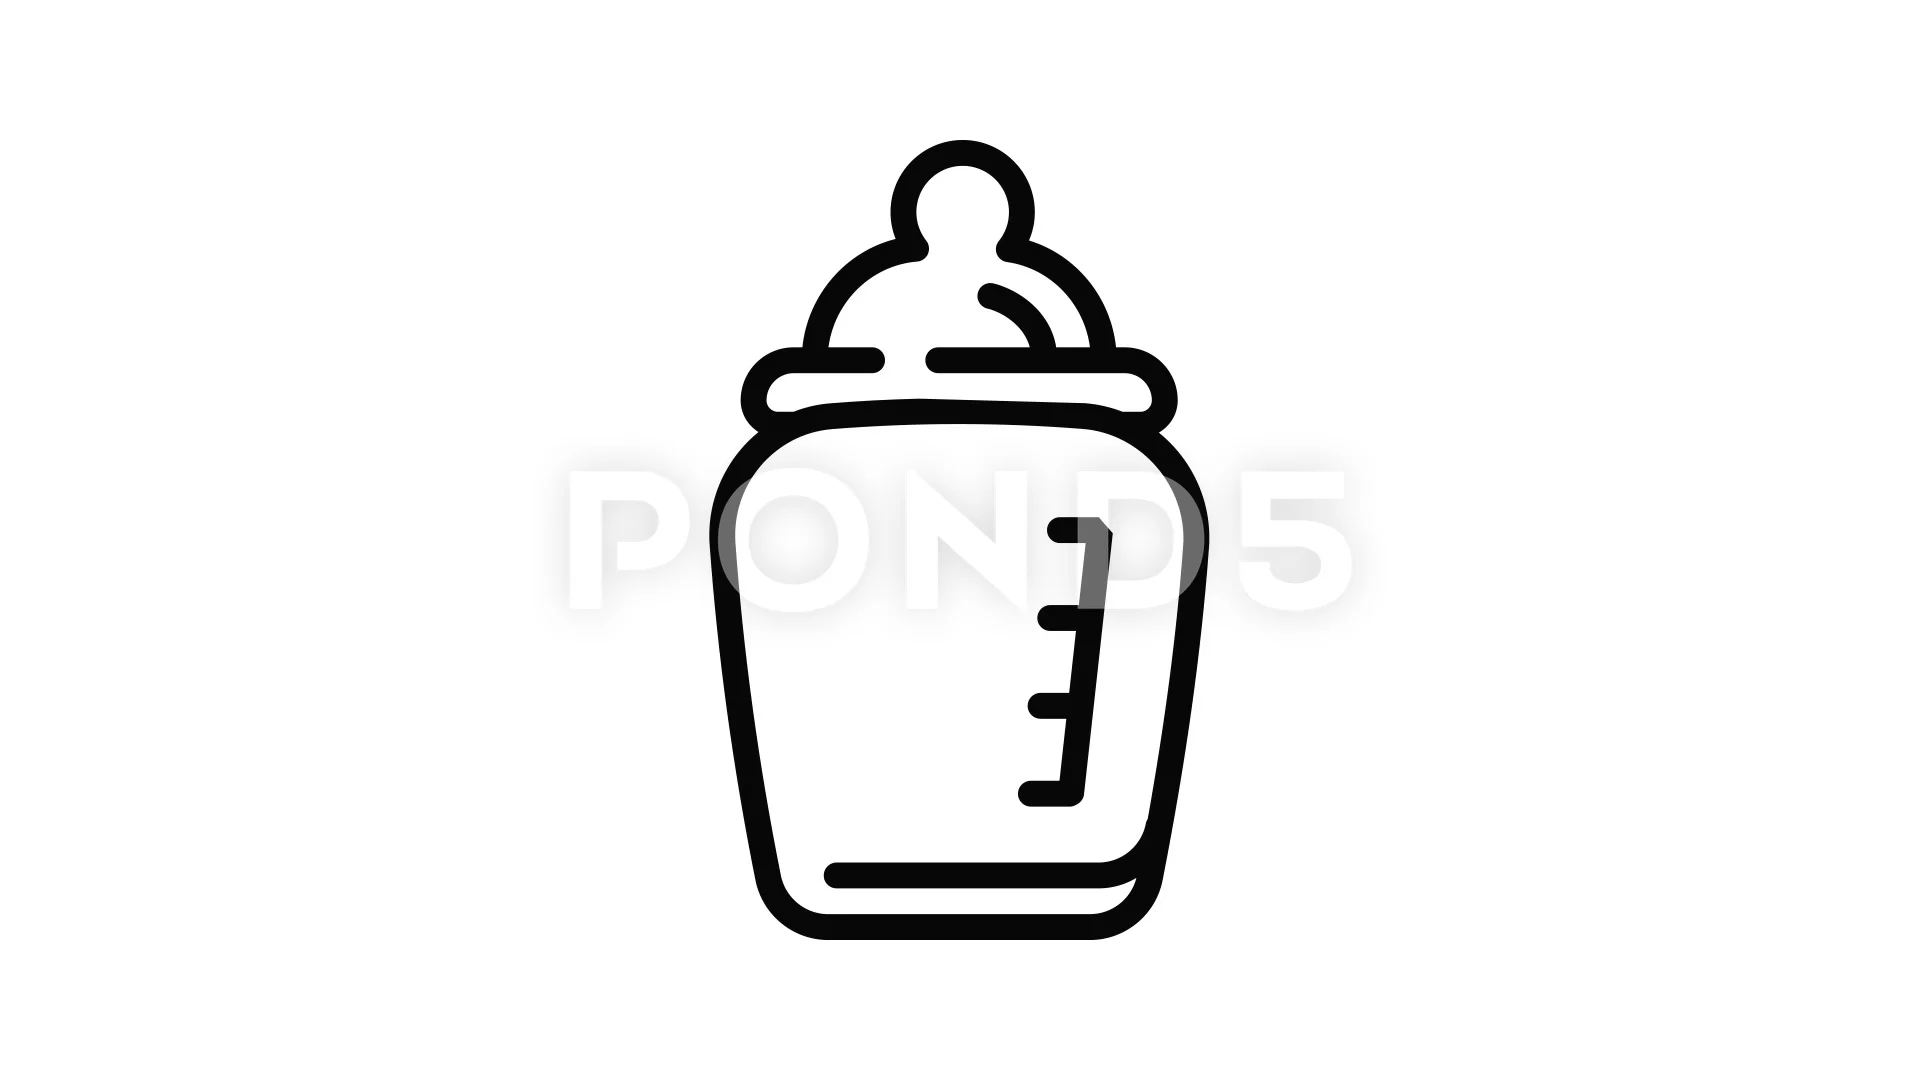 Free: Milk drawings vector - nohat.cc